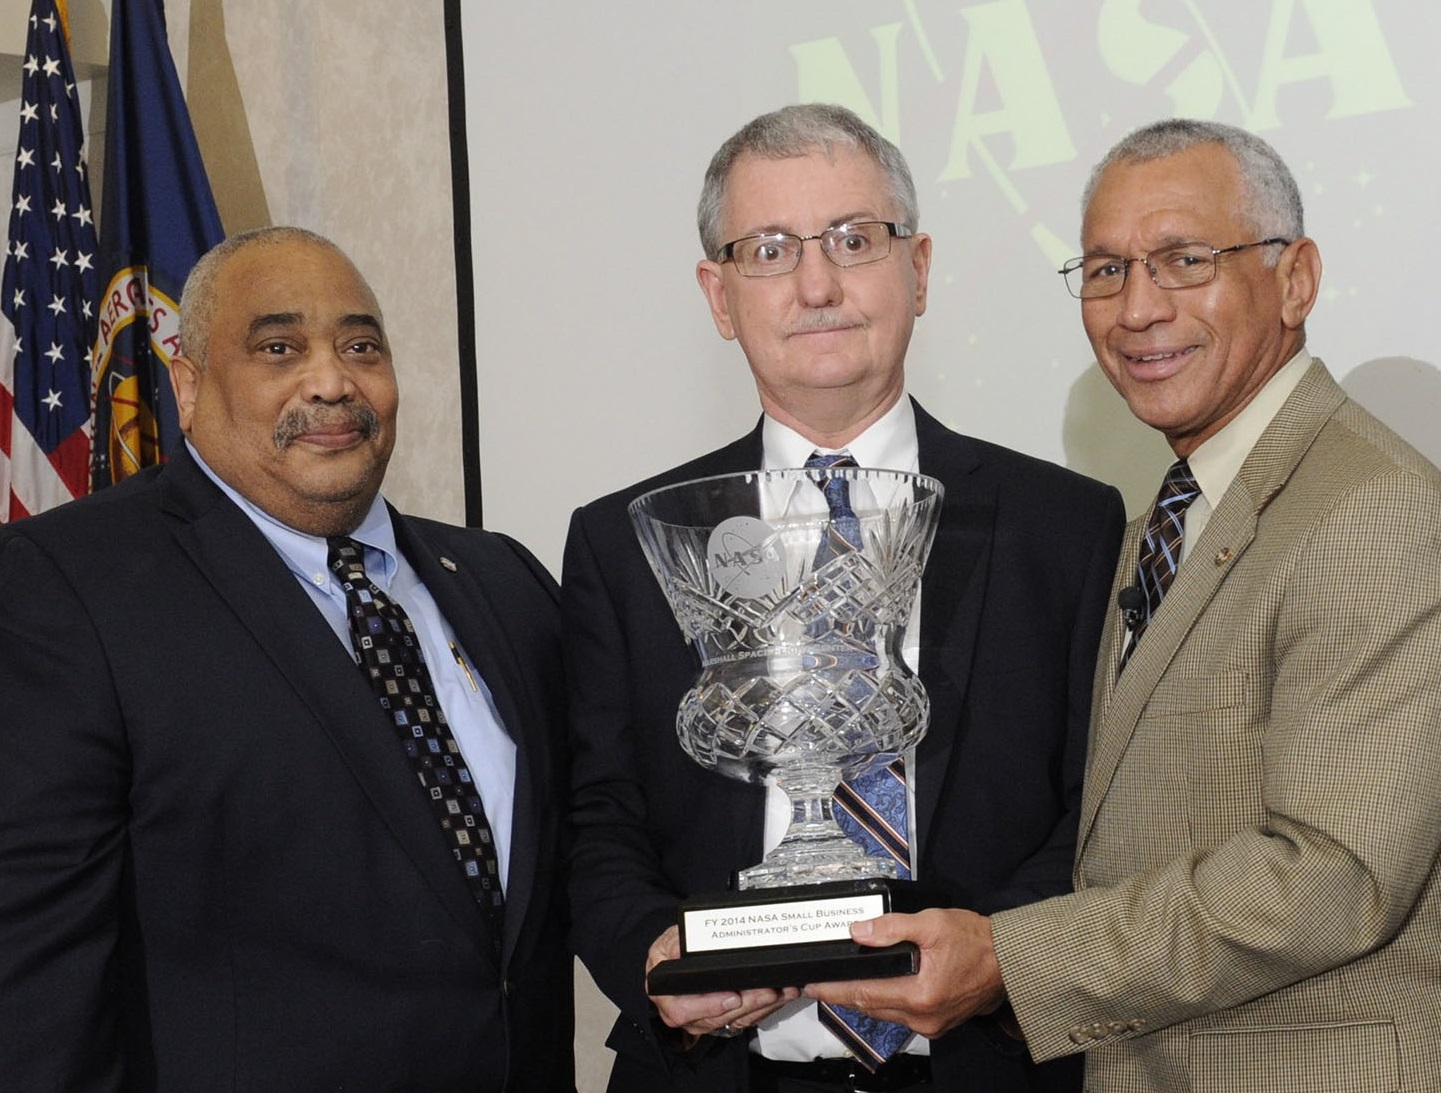 David Brock, center, accepts the NASA Small Business Administrator’s Cup in 2015 from former NASA Administrator Charles Bolden.